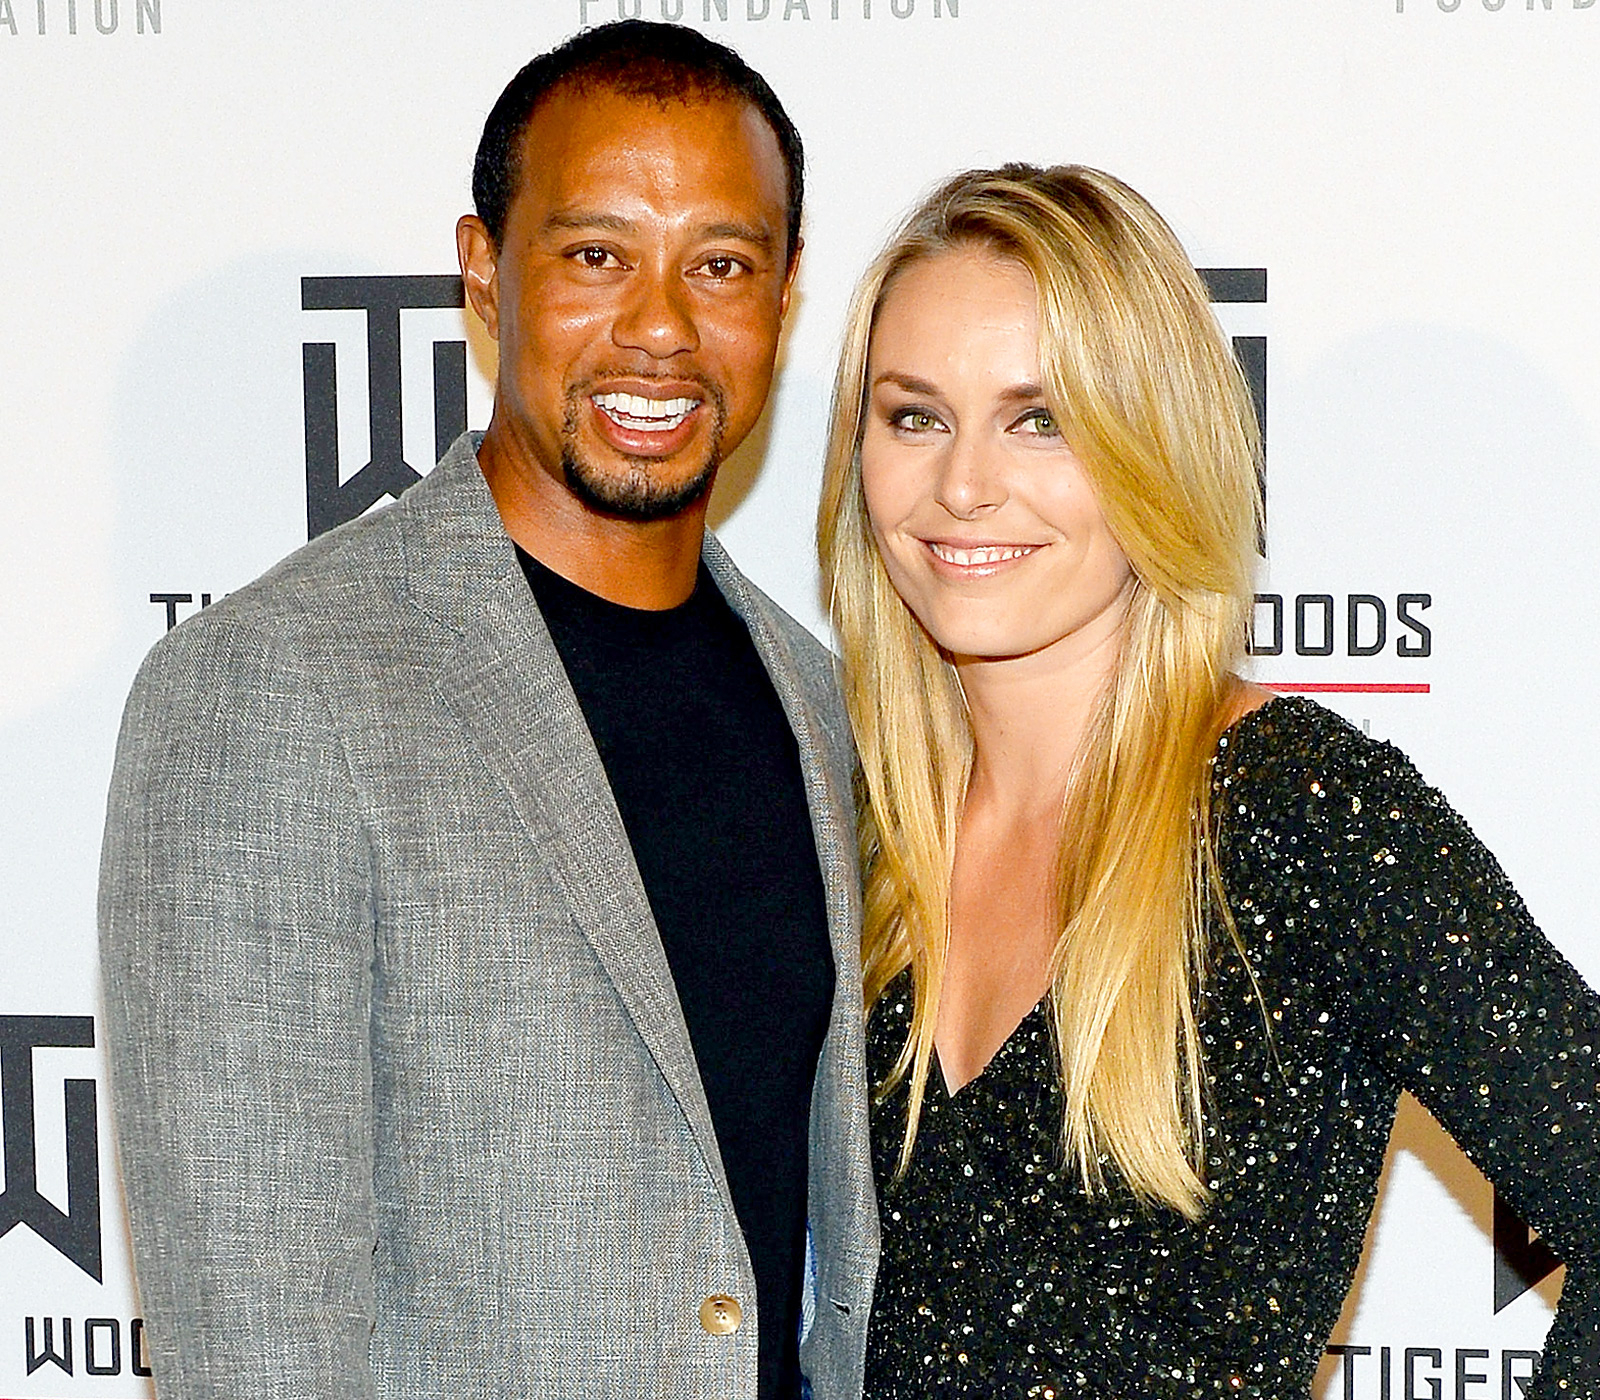 Lindsey Vonn Responds to Leaked Nude Photos of Her and Tiger Woods